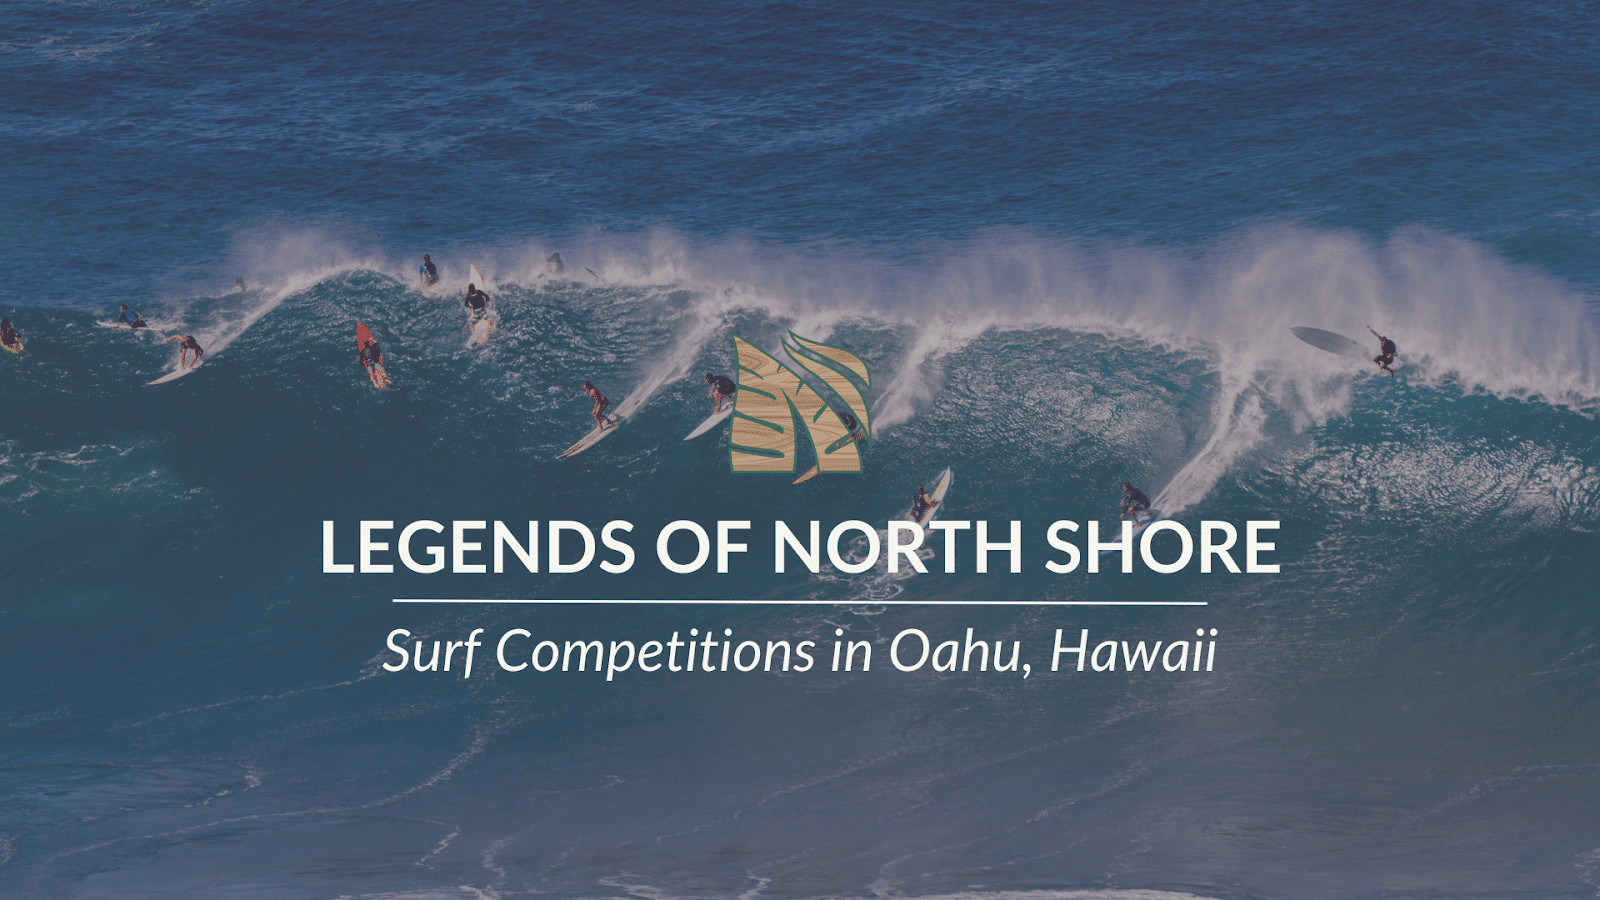 Dive into our new summer collab with the Legends of Oahu's North